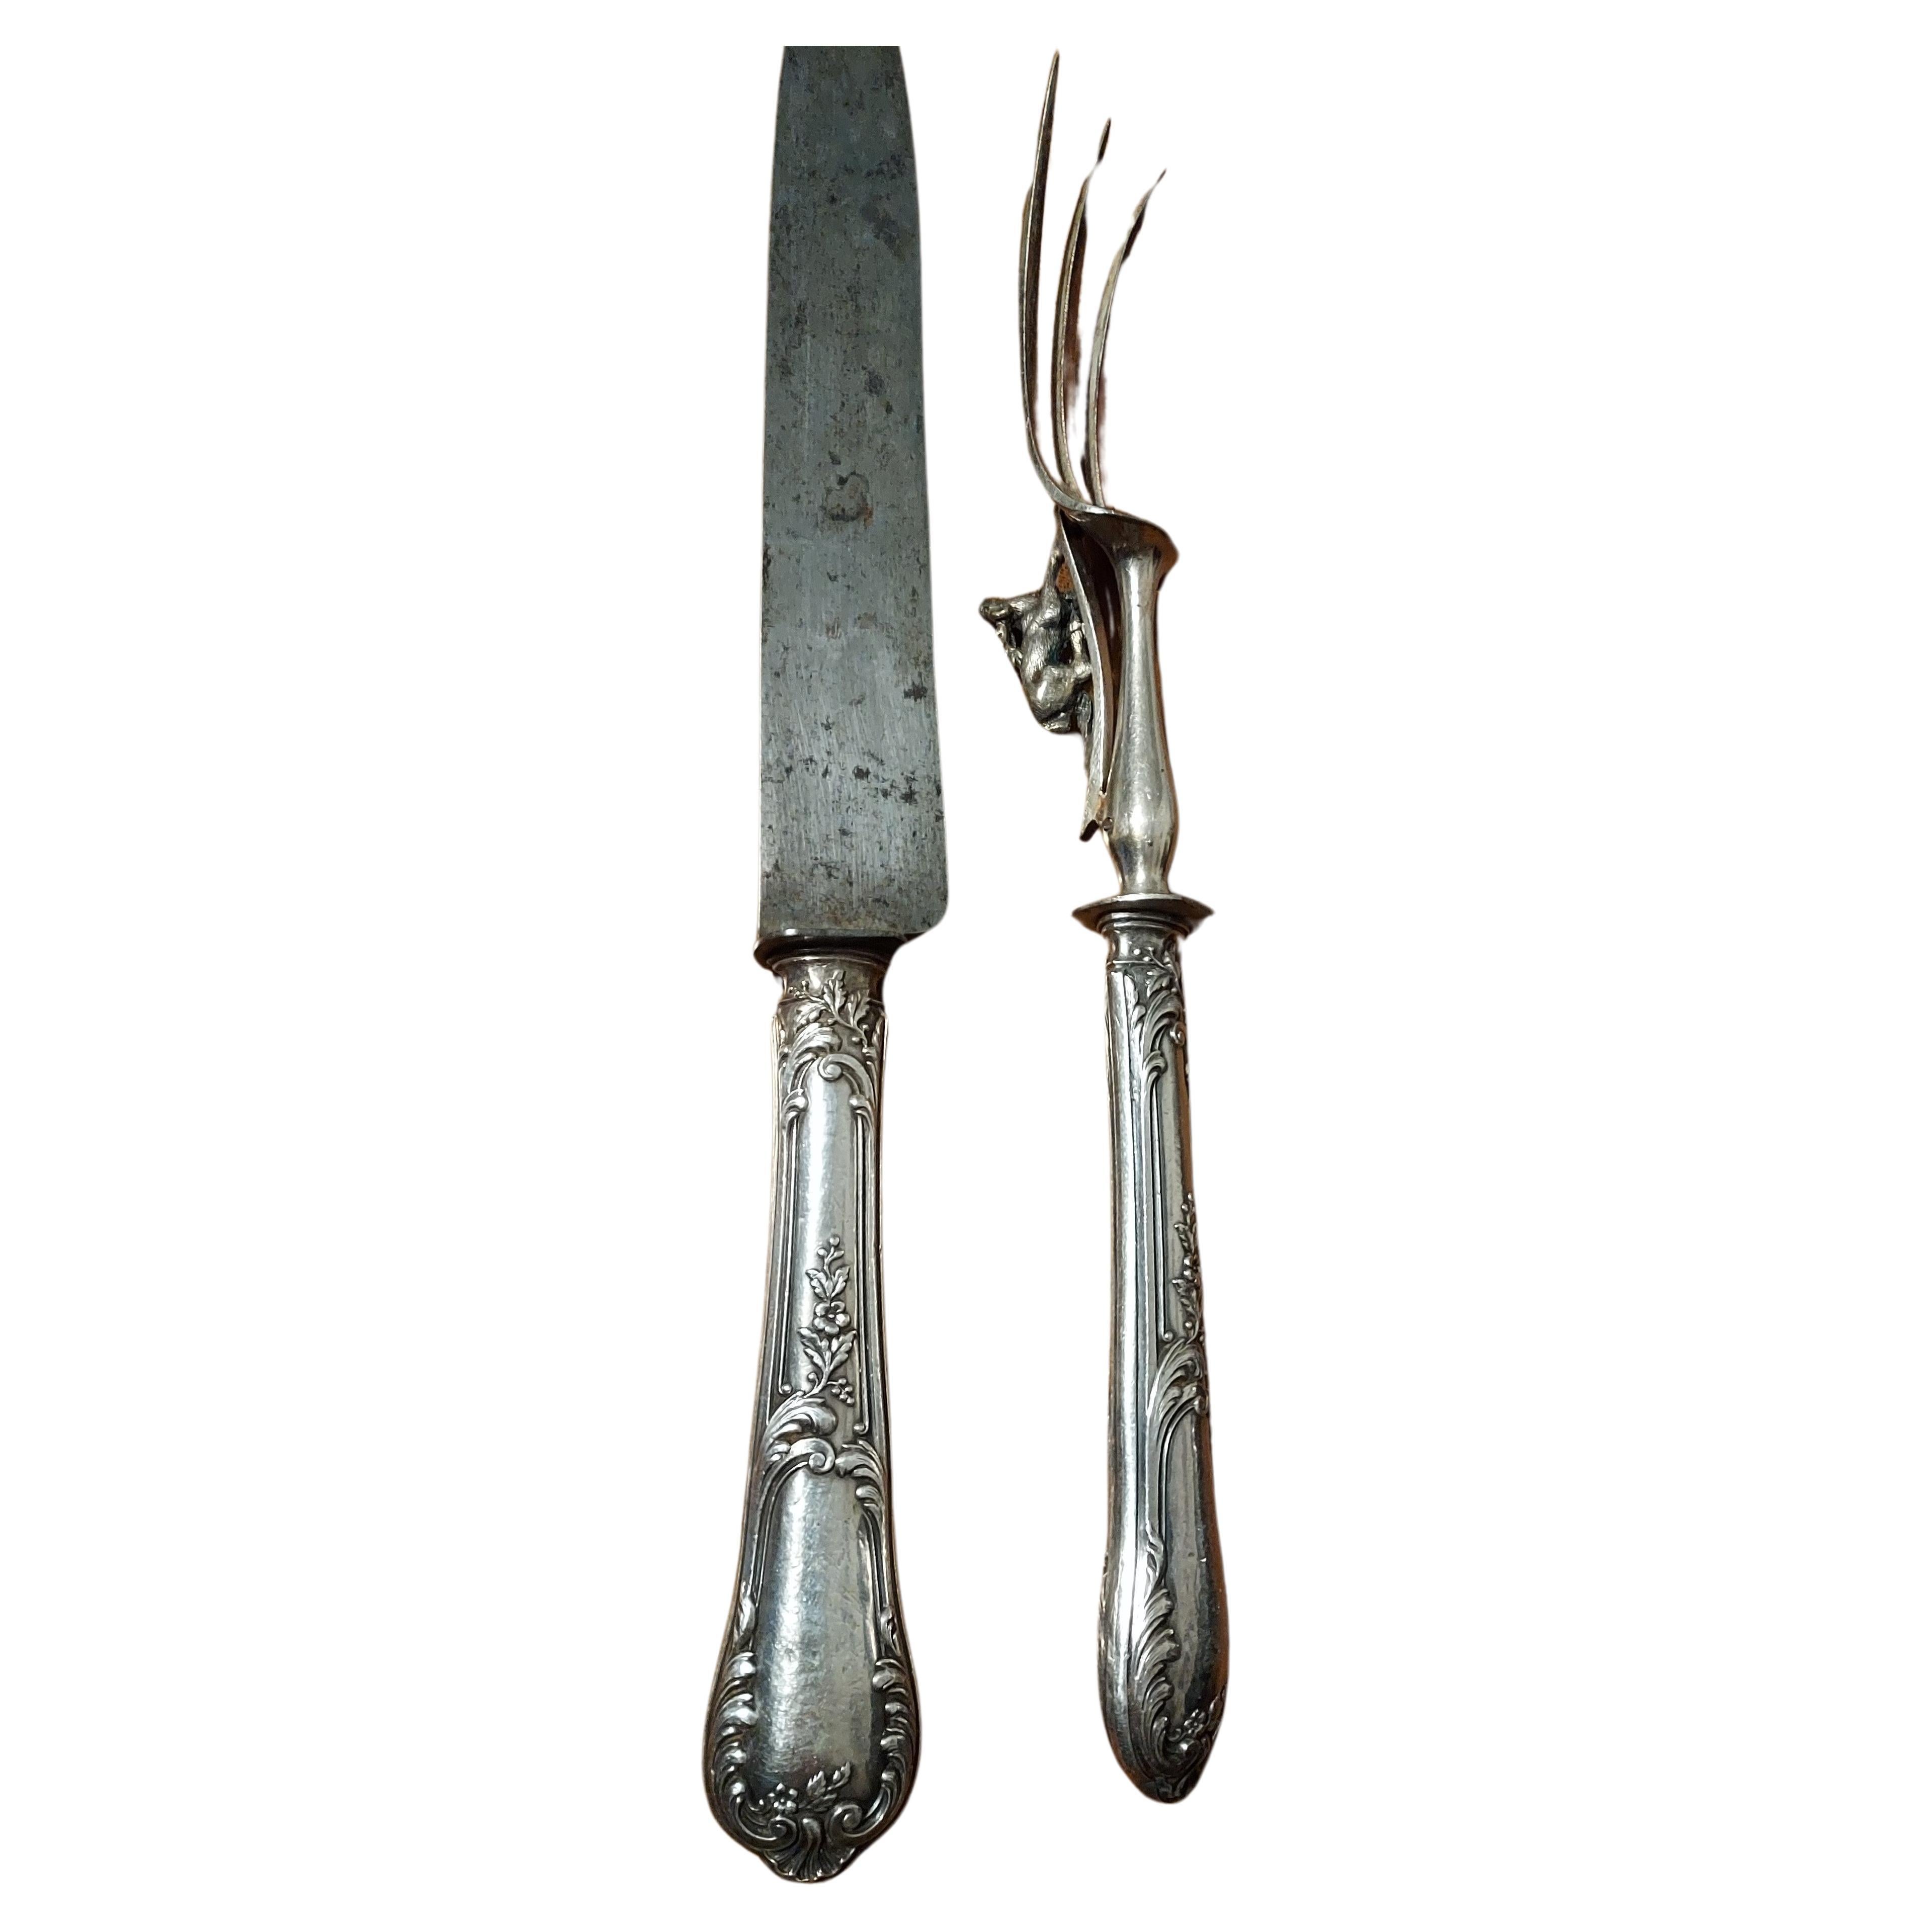 Antique Silver Carving Set of Knofe and Fork embellished with a protective Stag For Sale